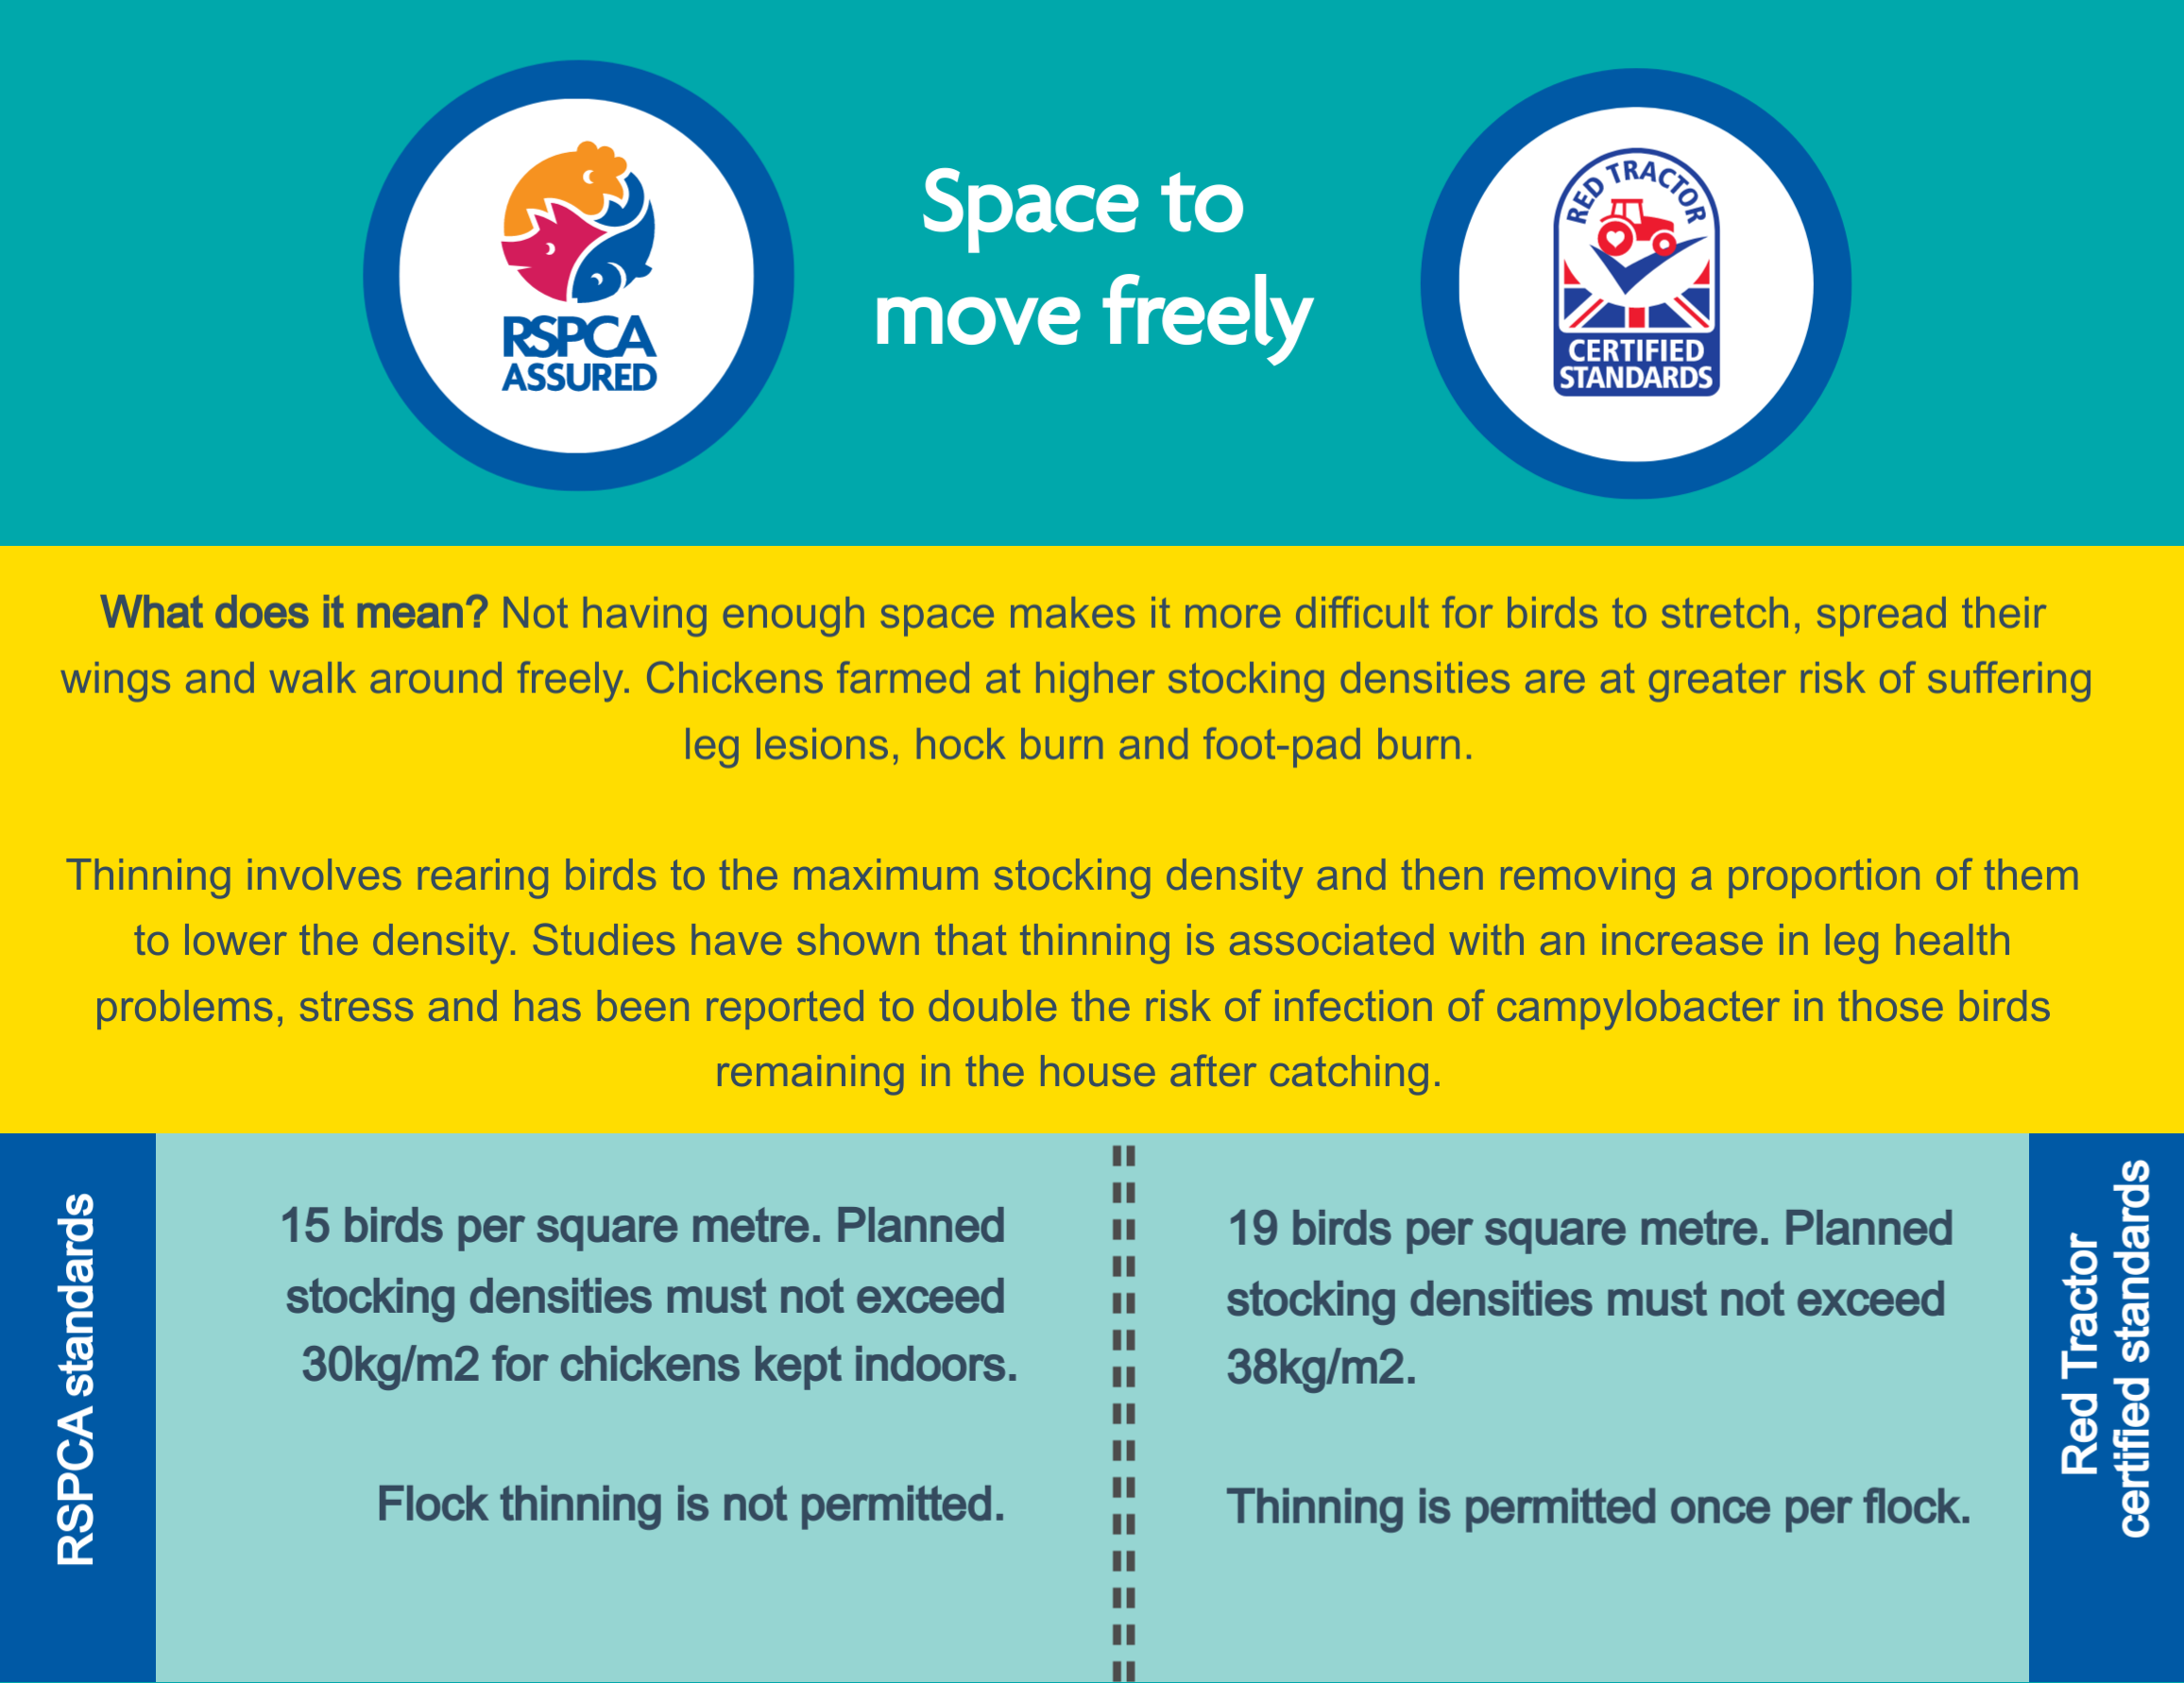 Space to move freely